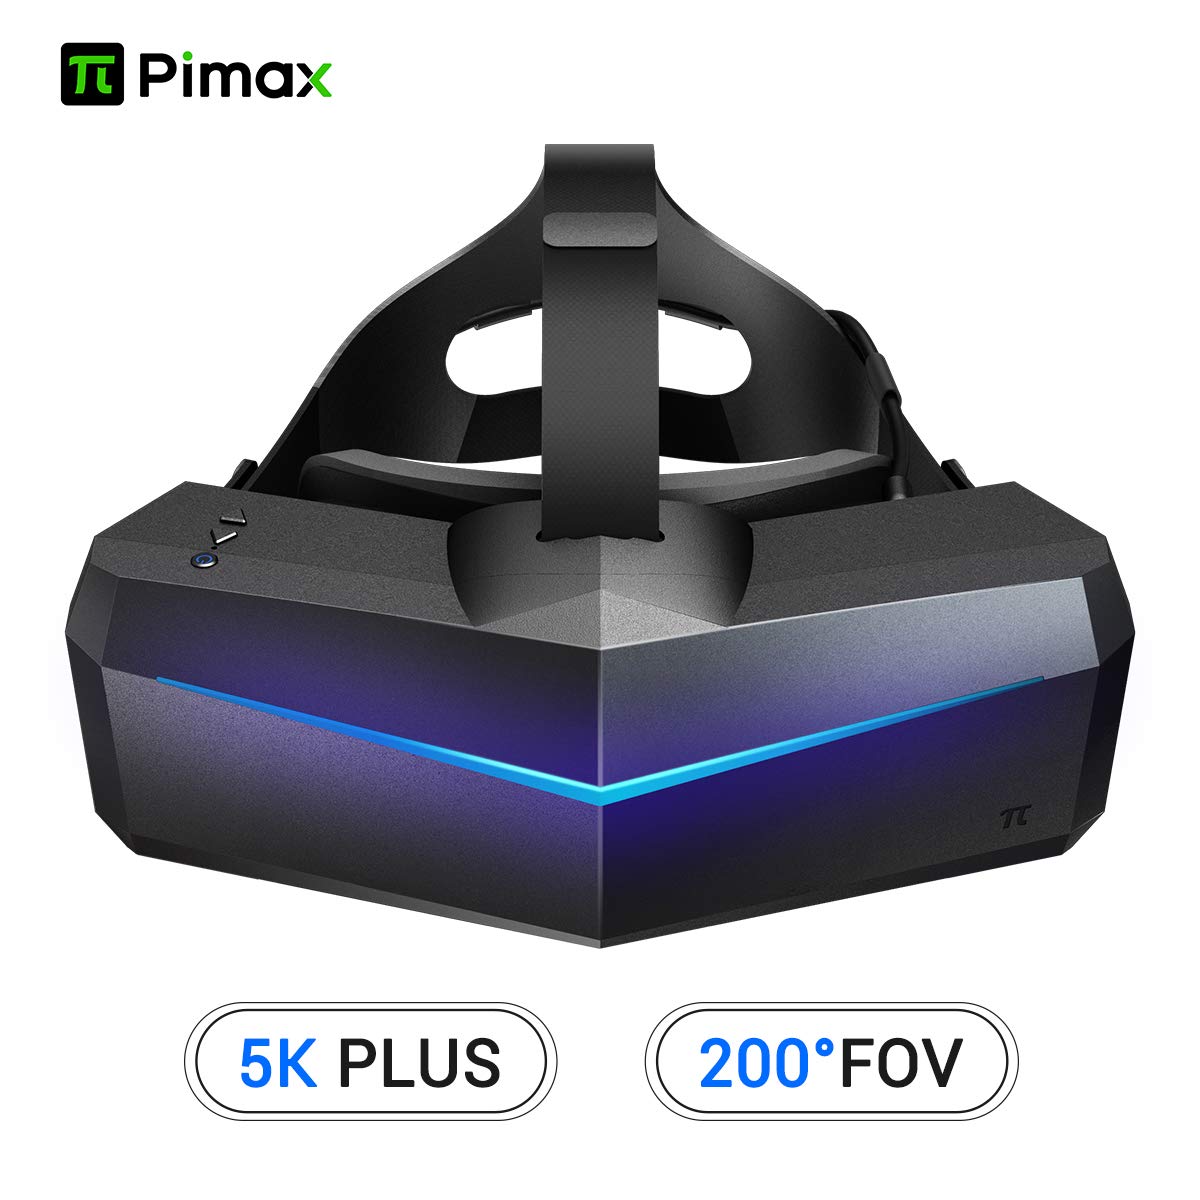 Pimax 5K Plus VR Virtual Reality Headset with Wide 200°FOV